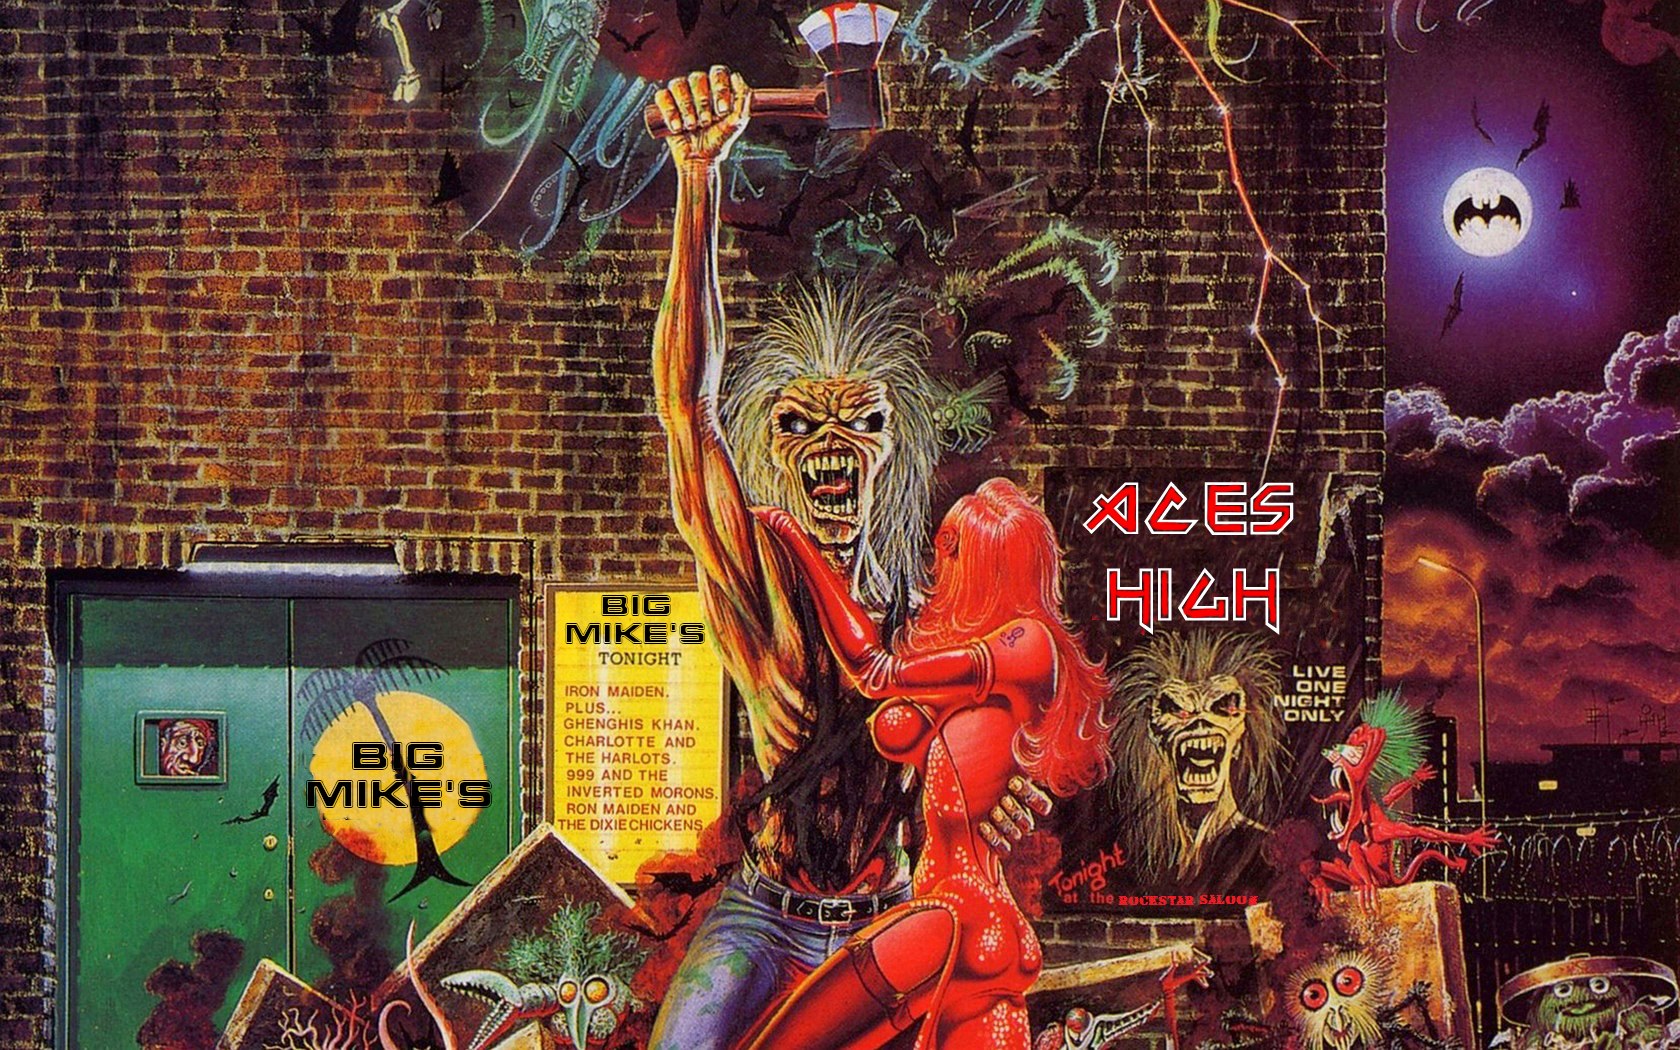 Aces High A Tribute to Iron Maiden Milwaukee and Sliver at Big Mikes Bar 2020